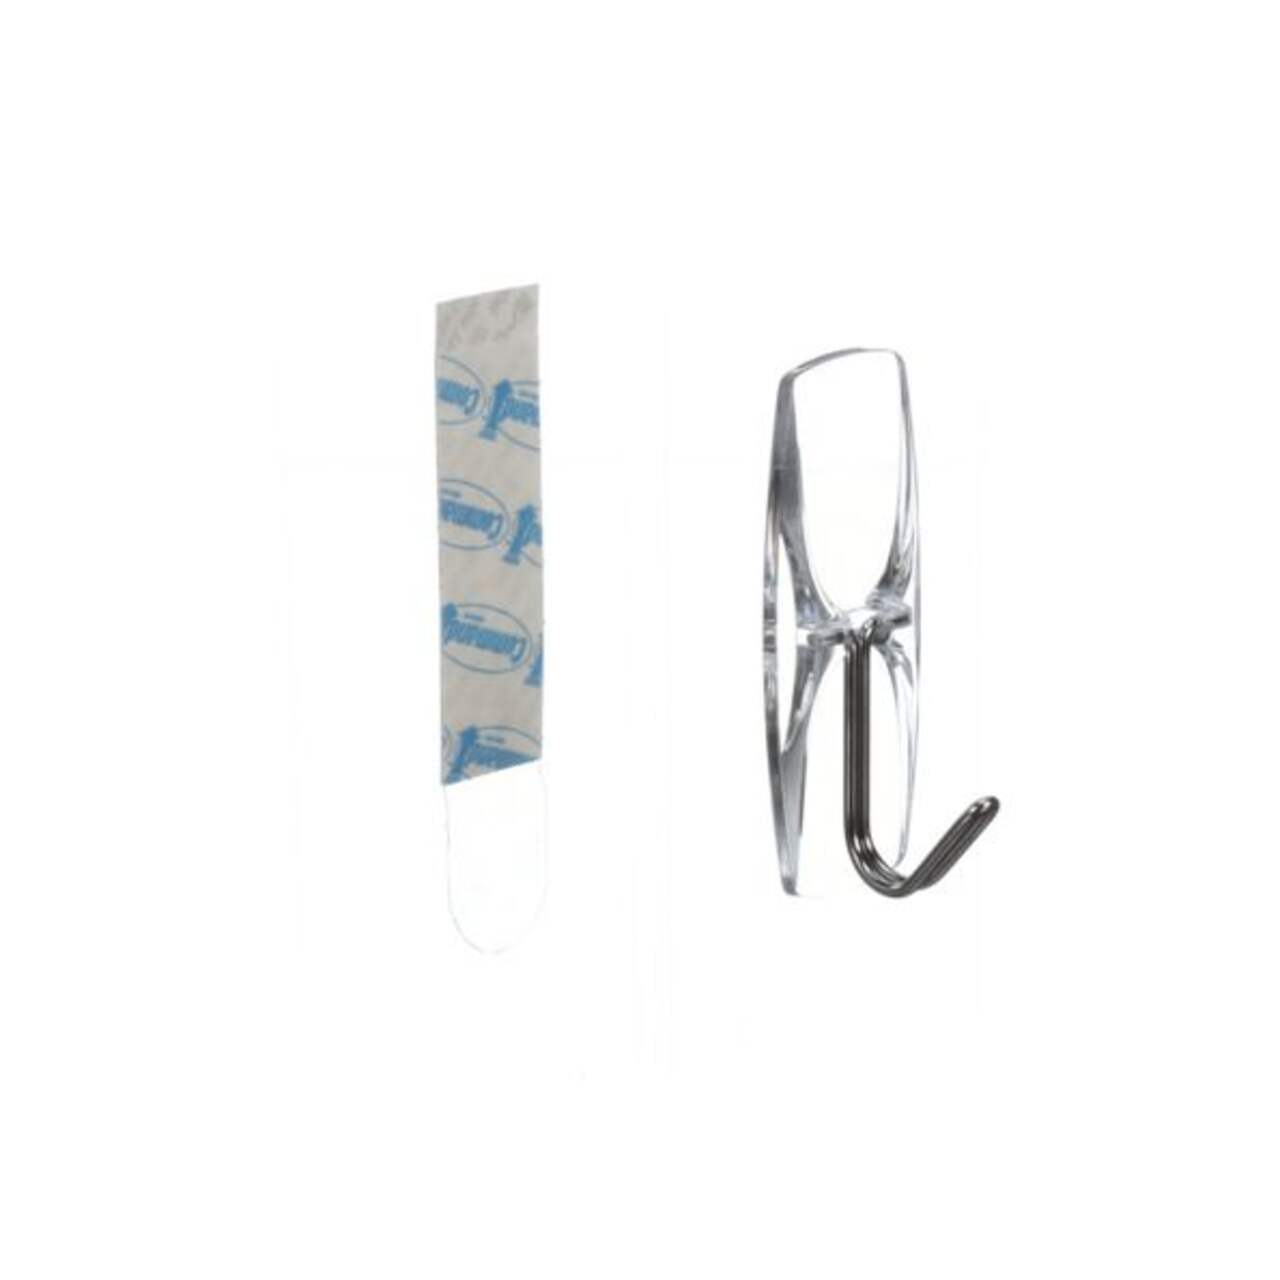 Command Small Clear Wire Hooks with Clear Strips, 3 ea (2 Pack